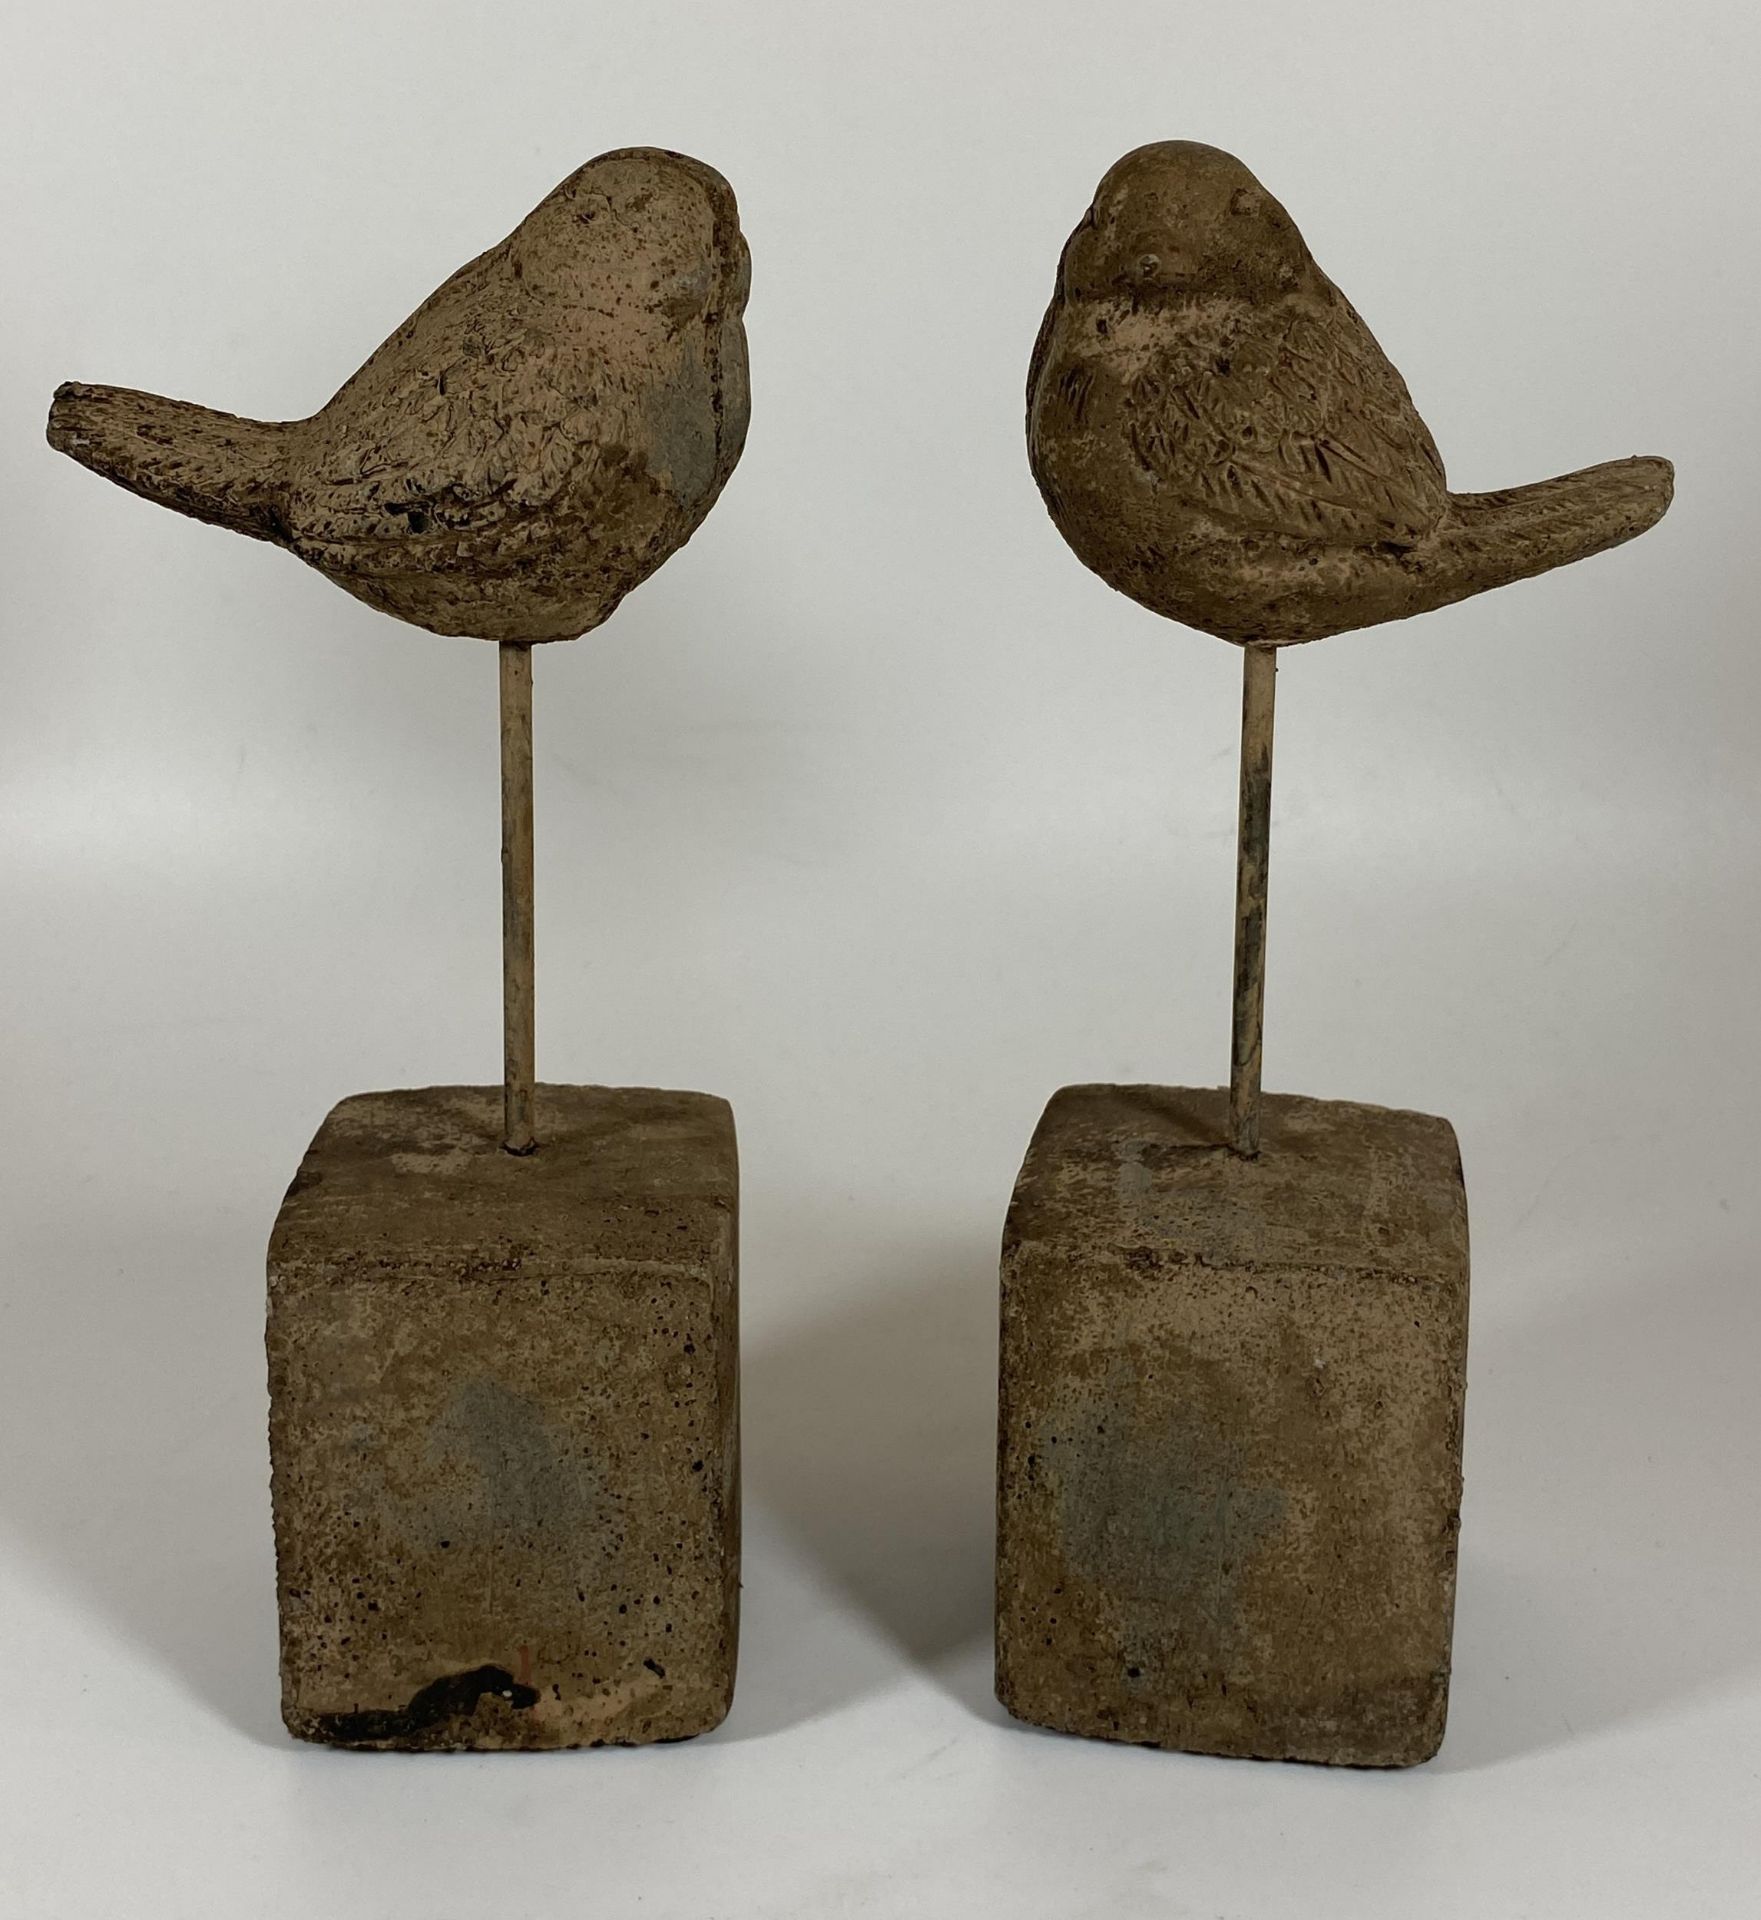 A PAIR OF DECORATIVE STONE BIRD FIGURES ON PLINTH BASES, HEIGHT 24CM